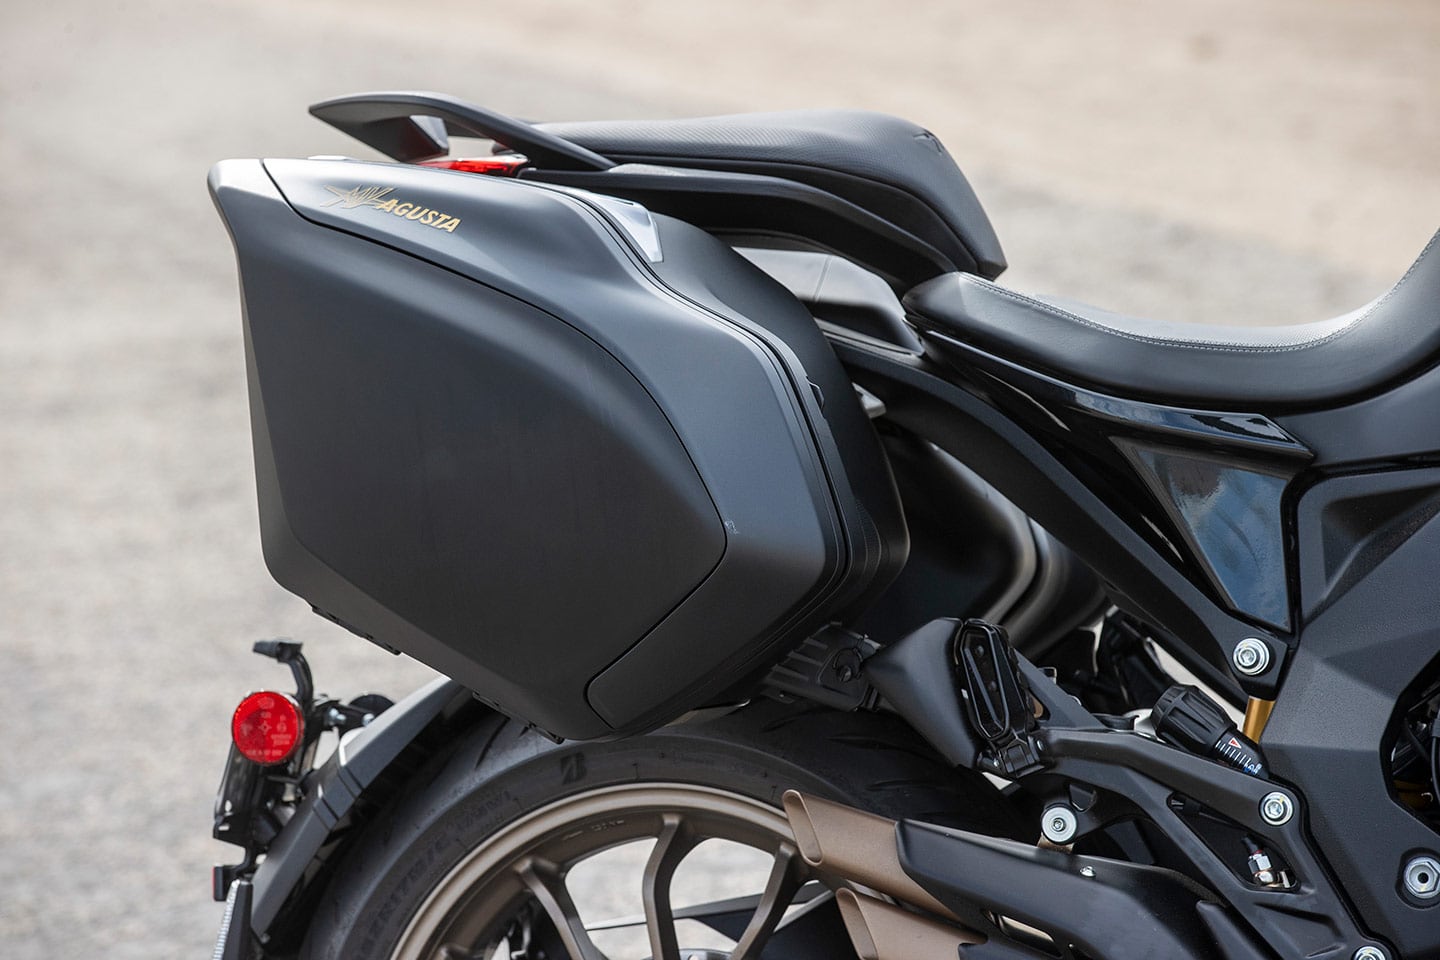 The Turismo Veloce’s passenger seat is uniquely split from the passenger seat, adding a stylish flair and getting the pillion up above the rider.